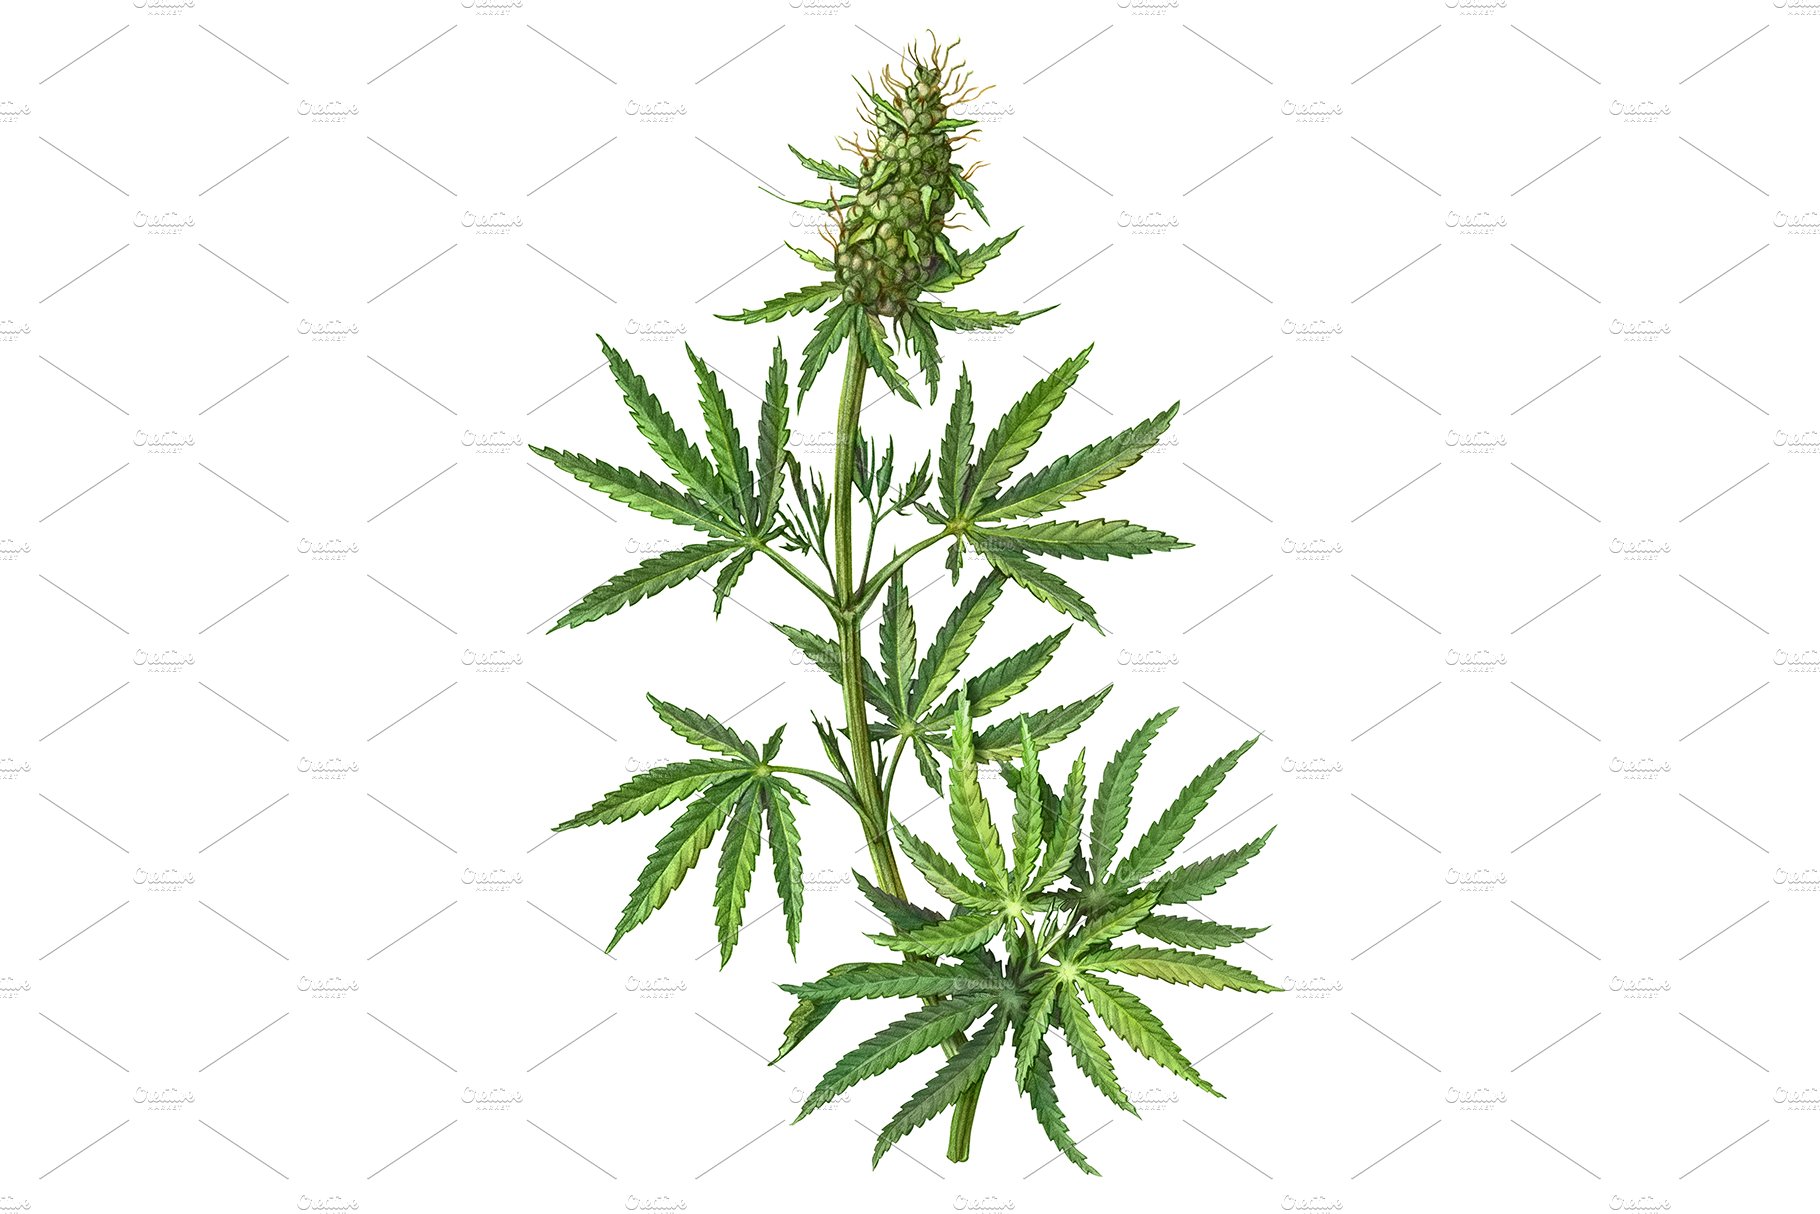 Cannabis Plant Drawing Isolated cover image.